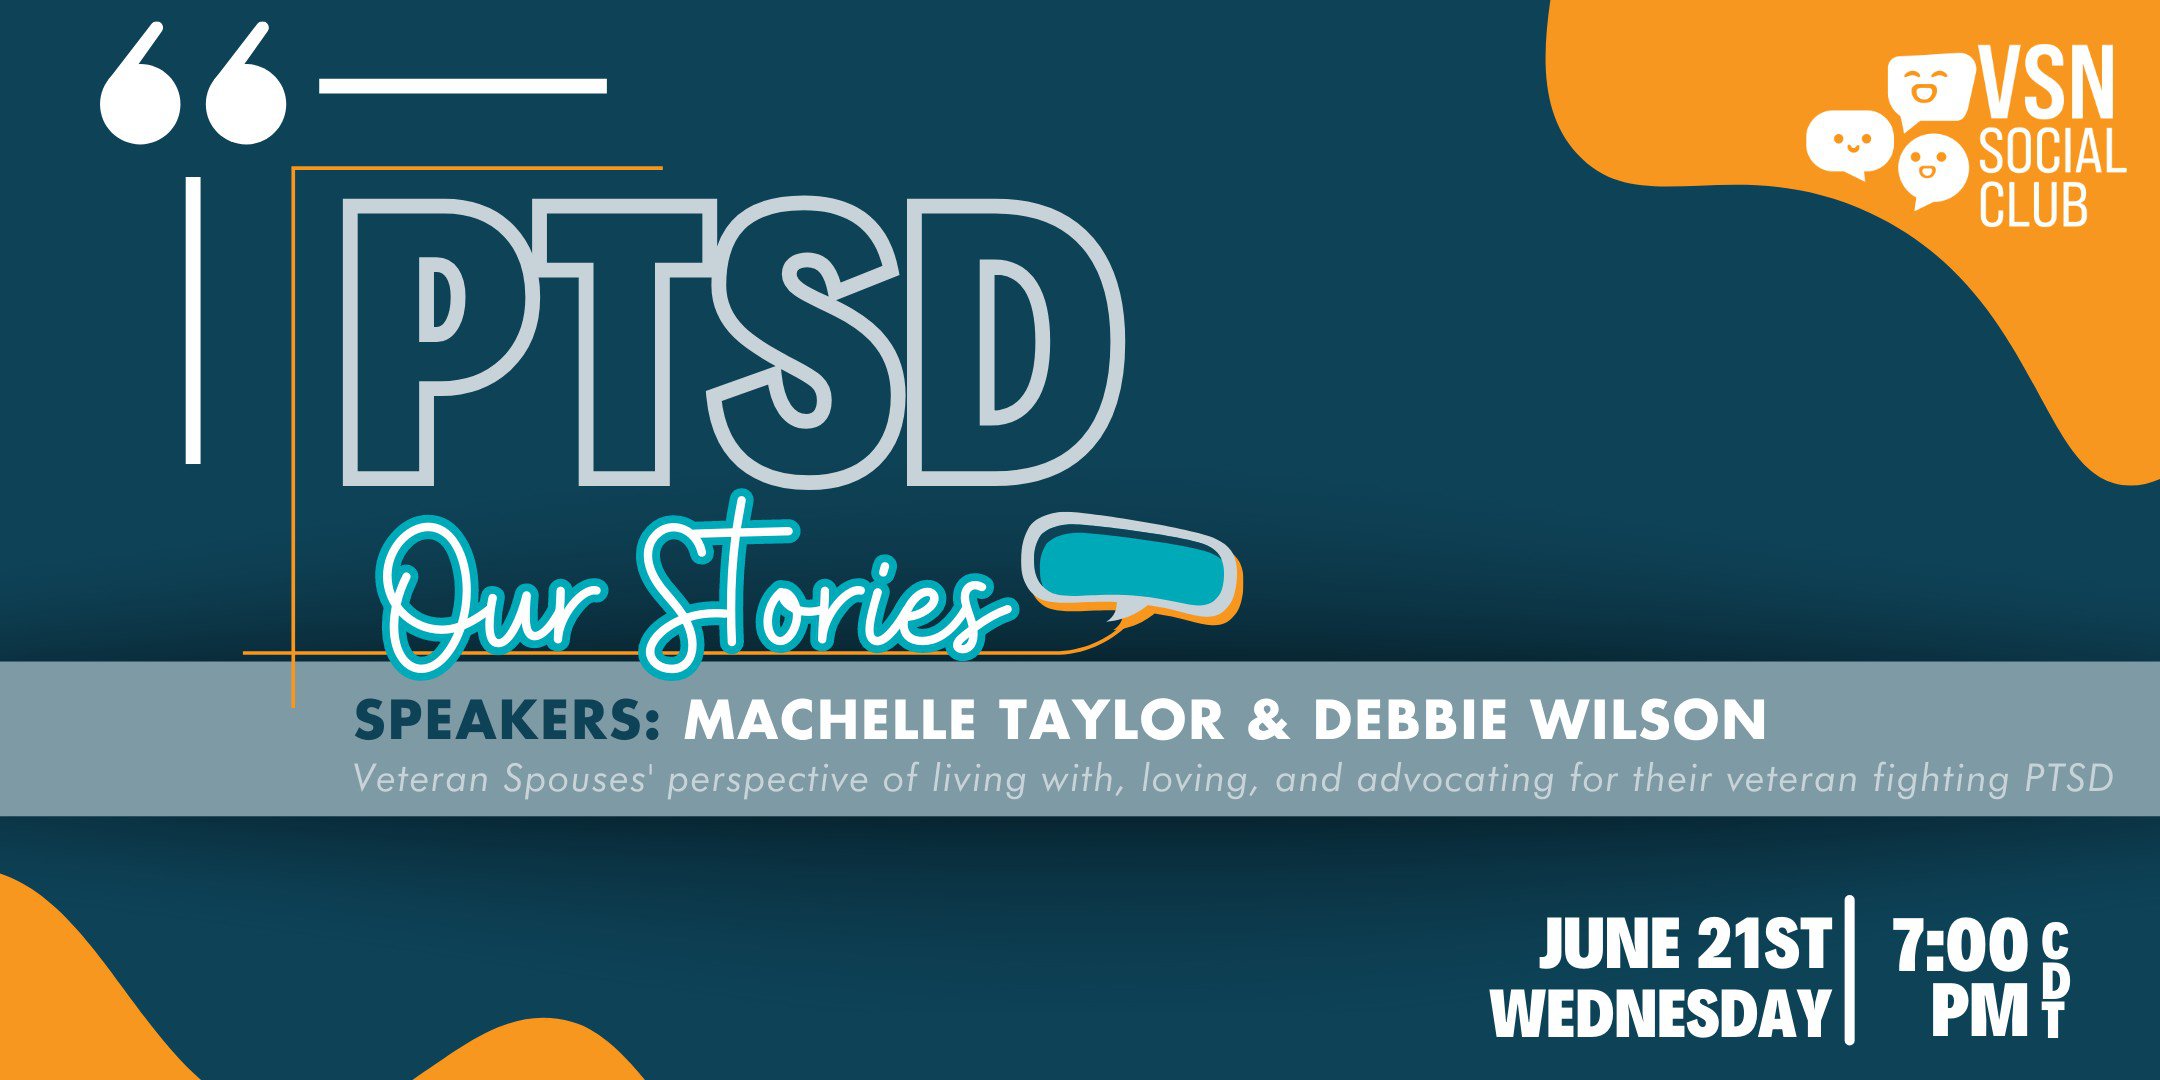 Our Stories: PTSD on June 21st